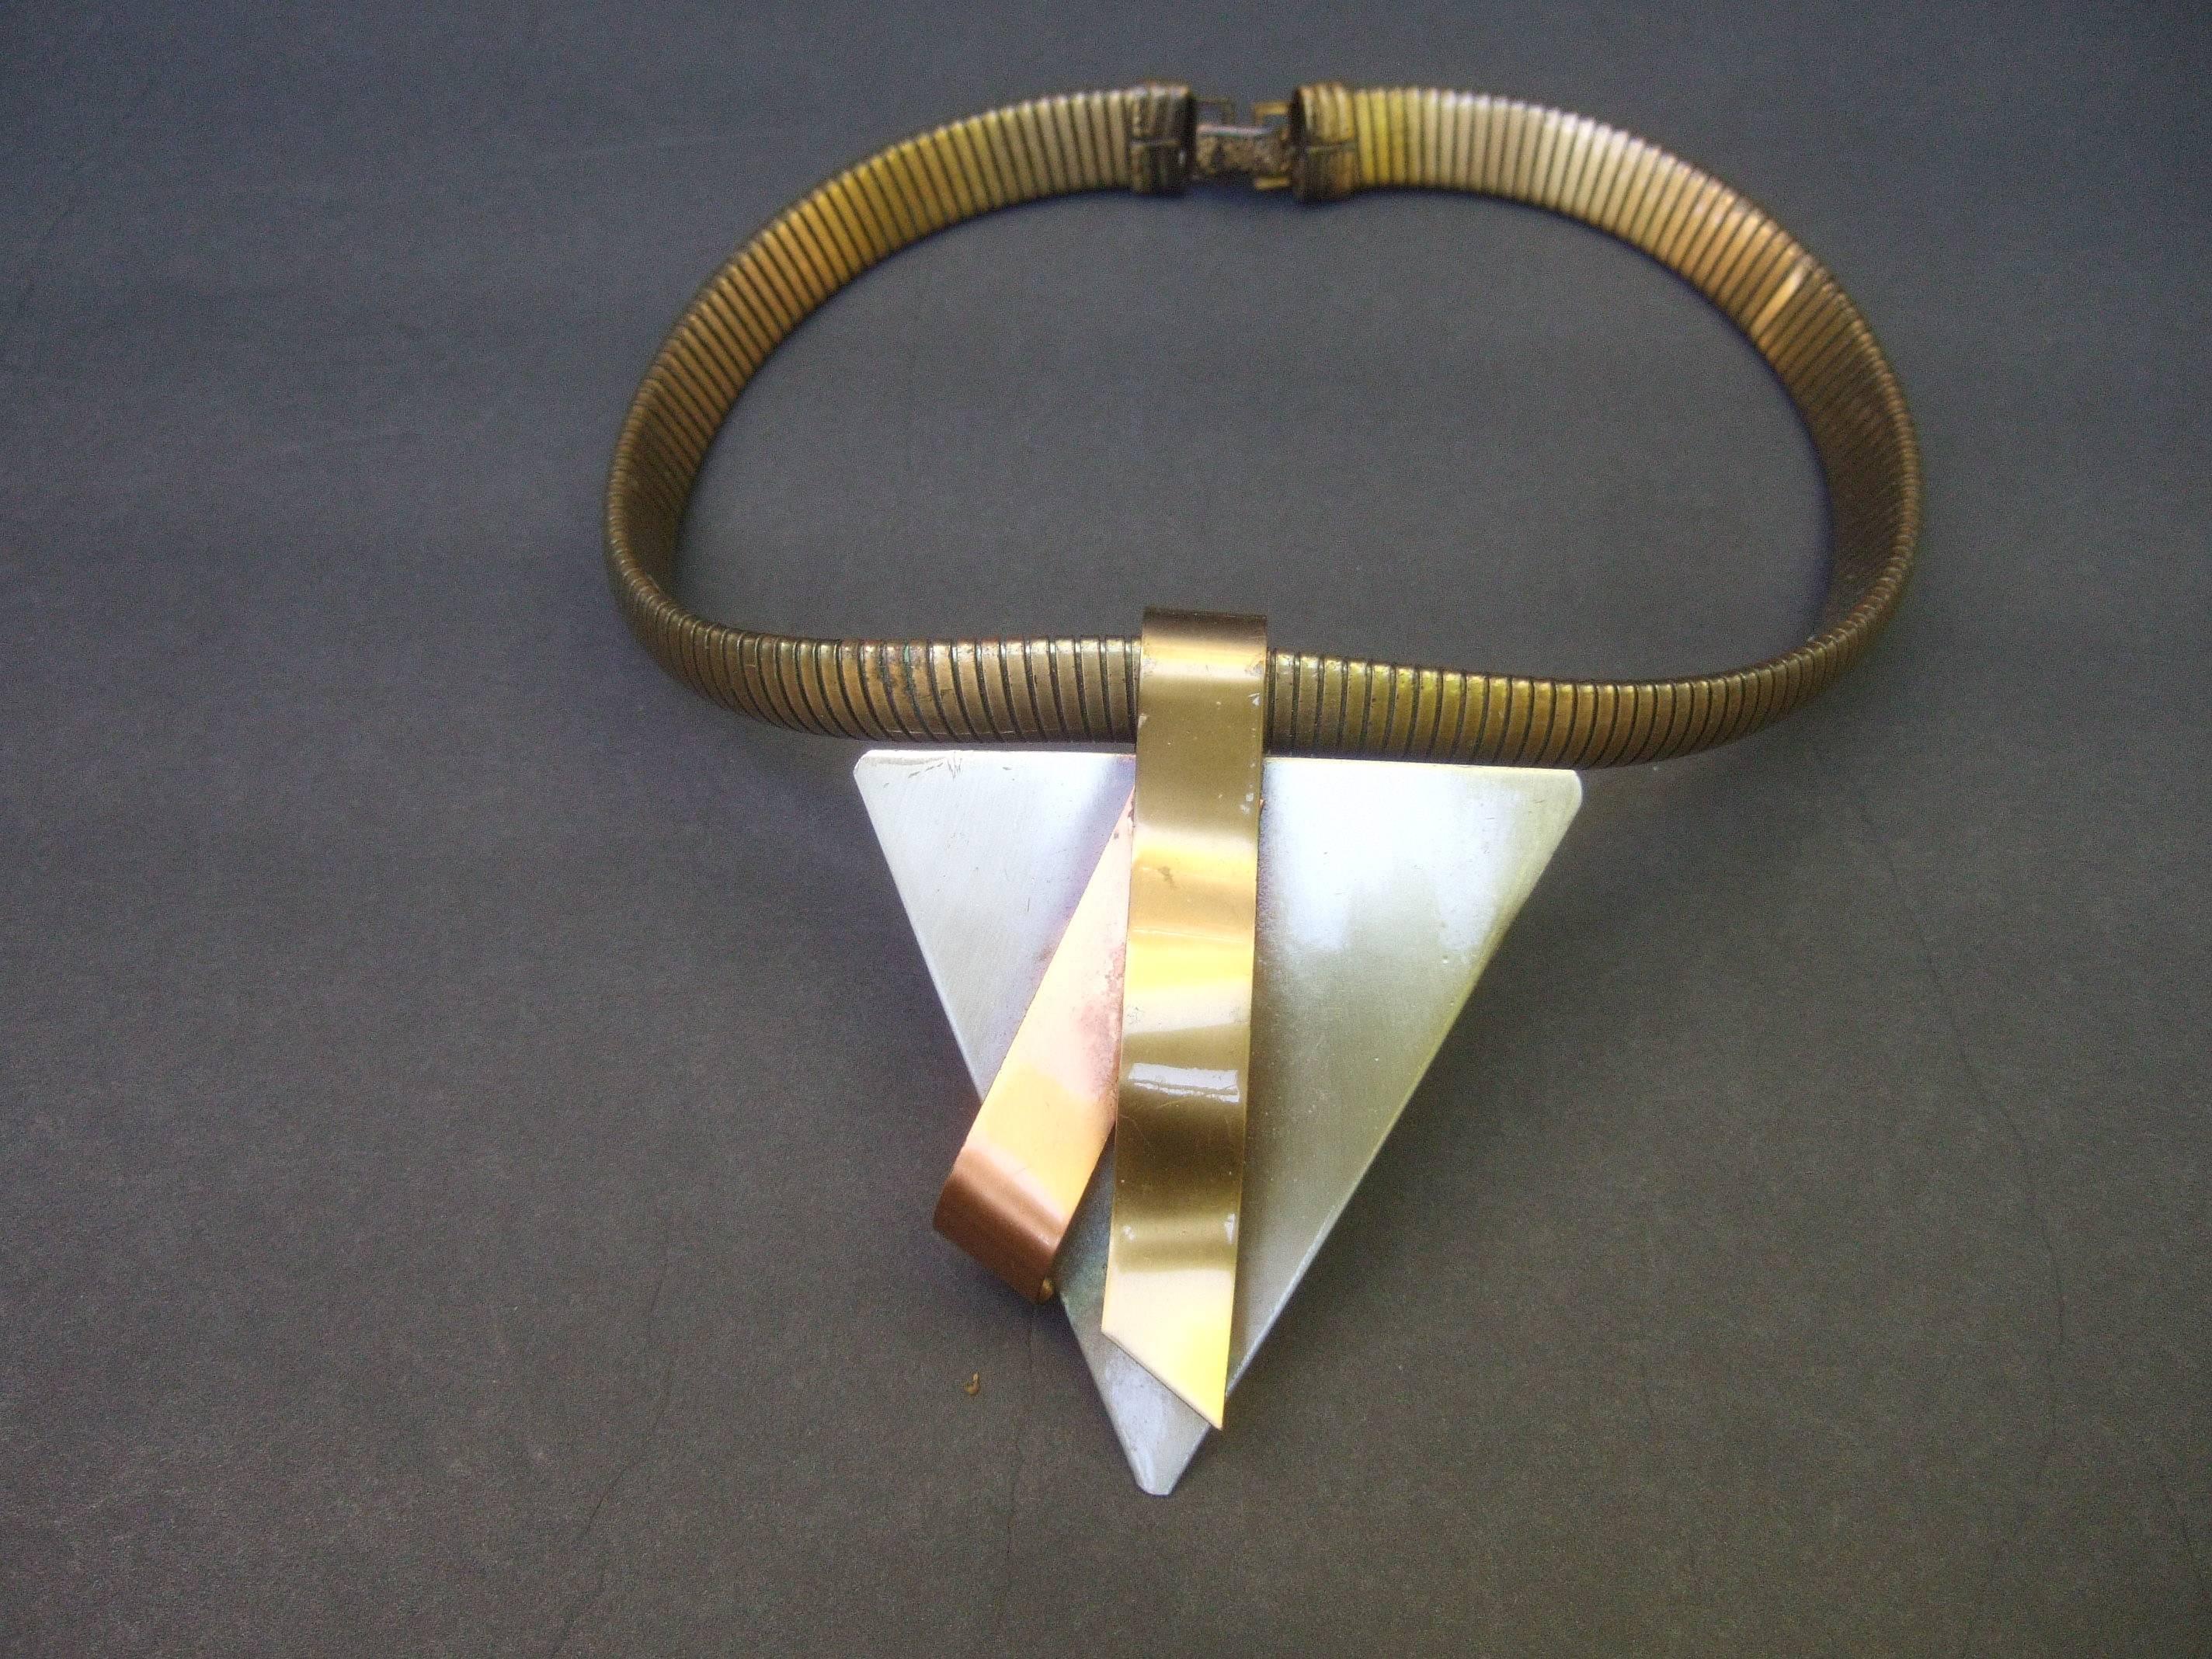 Brutalist mixed metal industrial choker necklace c 1990s
The severe bold artisan choker is designed with a large 
triangular metal pendant. The large pendant is 
designed with a darkened silver tone patina;
juxtaposed with two sinuous metal